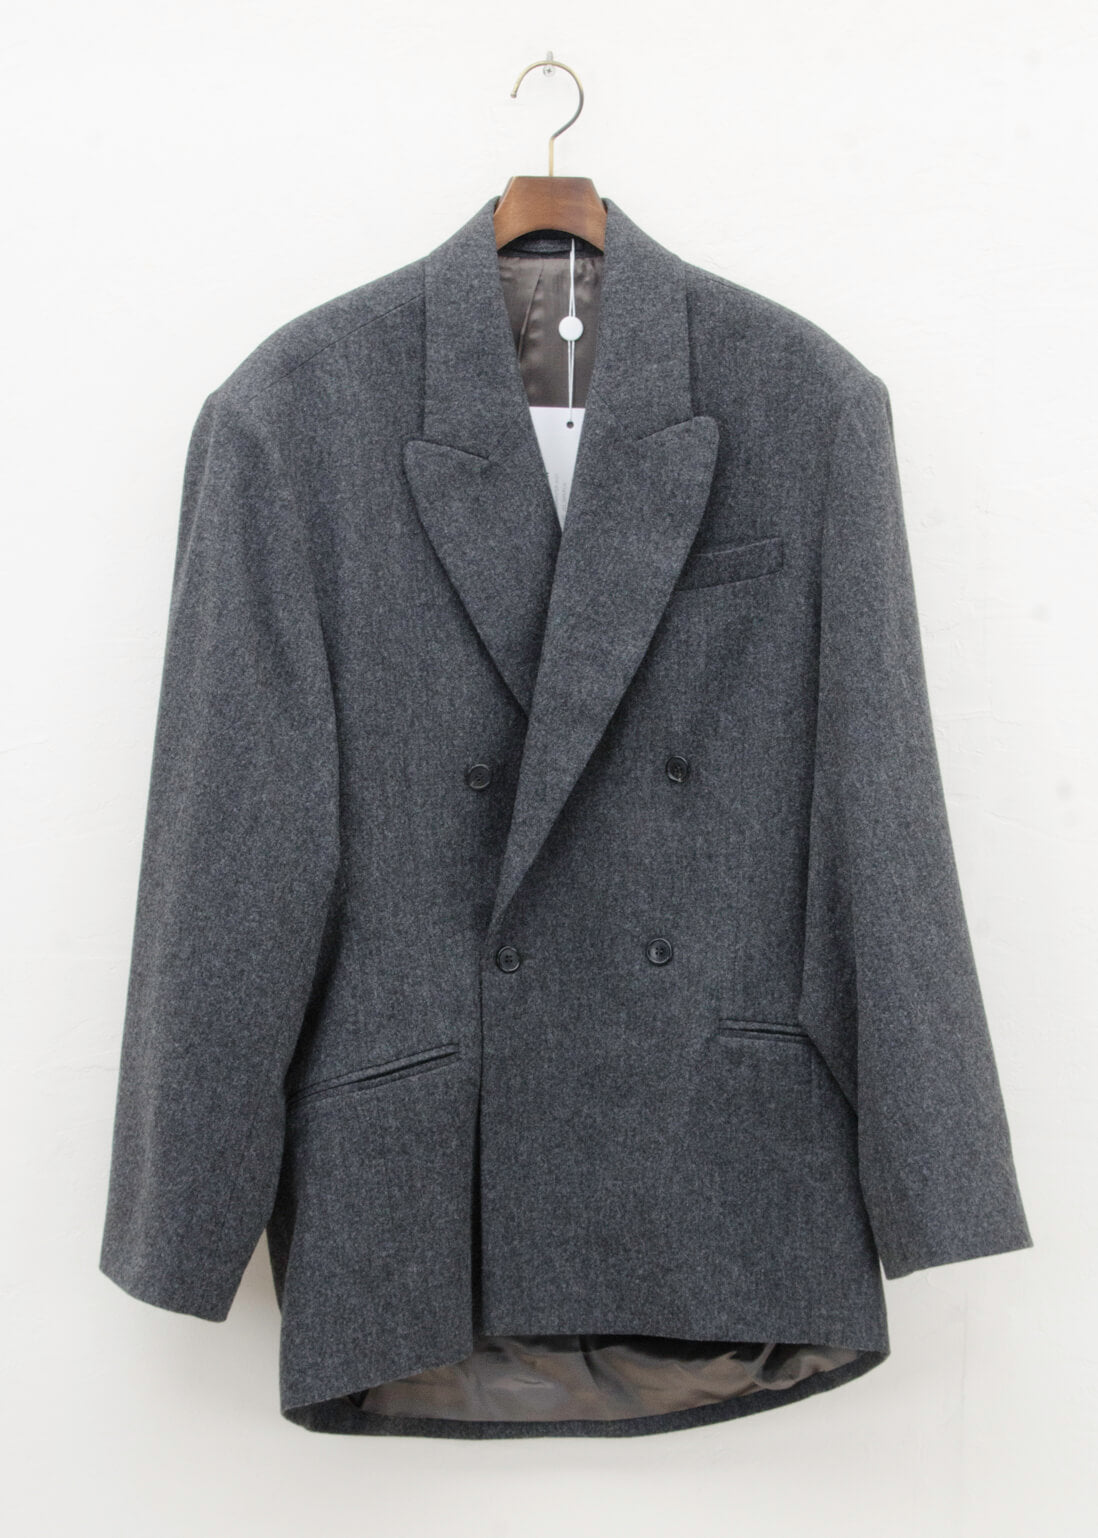 HED MAYNER DROPPED BACK DOUBLE BREASTED JACKET / GREY FLANNEL